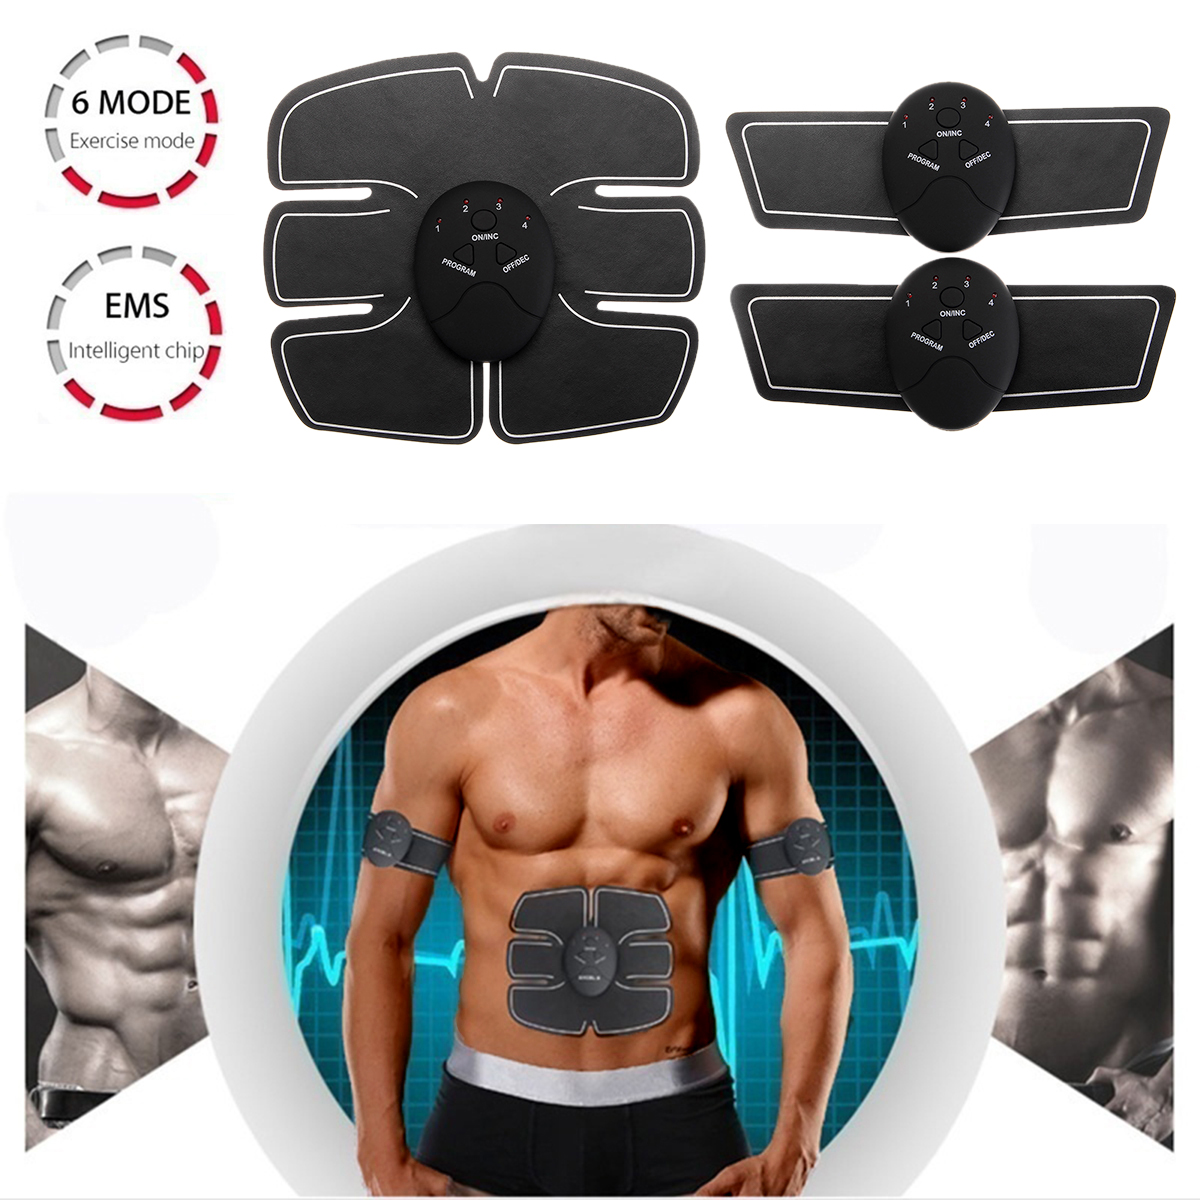 6-Modes-Smart-Abdominal-Muscle-Trainer-Abdomen-Arm-Shoulder-Strength-Fitness-Exercise-Tool-ABS-Stimu-1642922-3